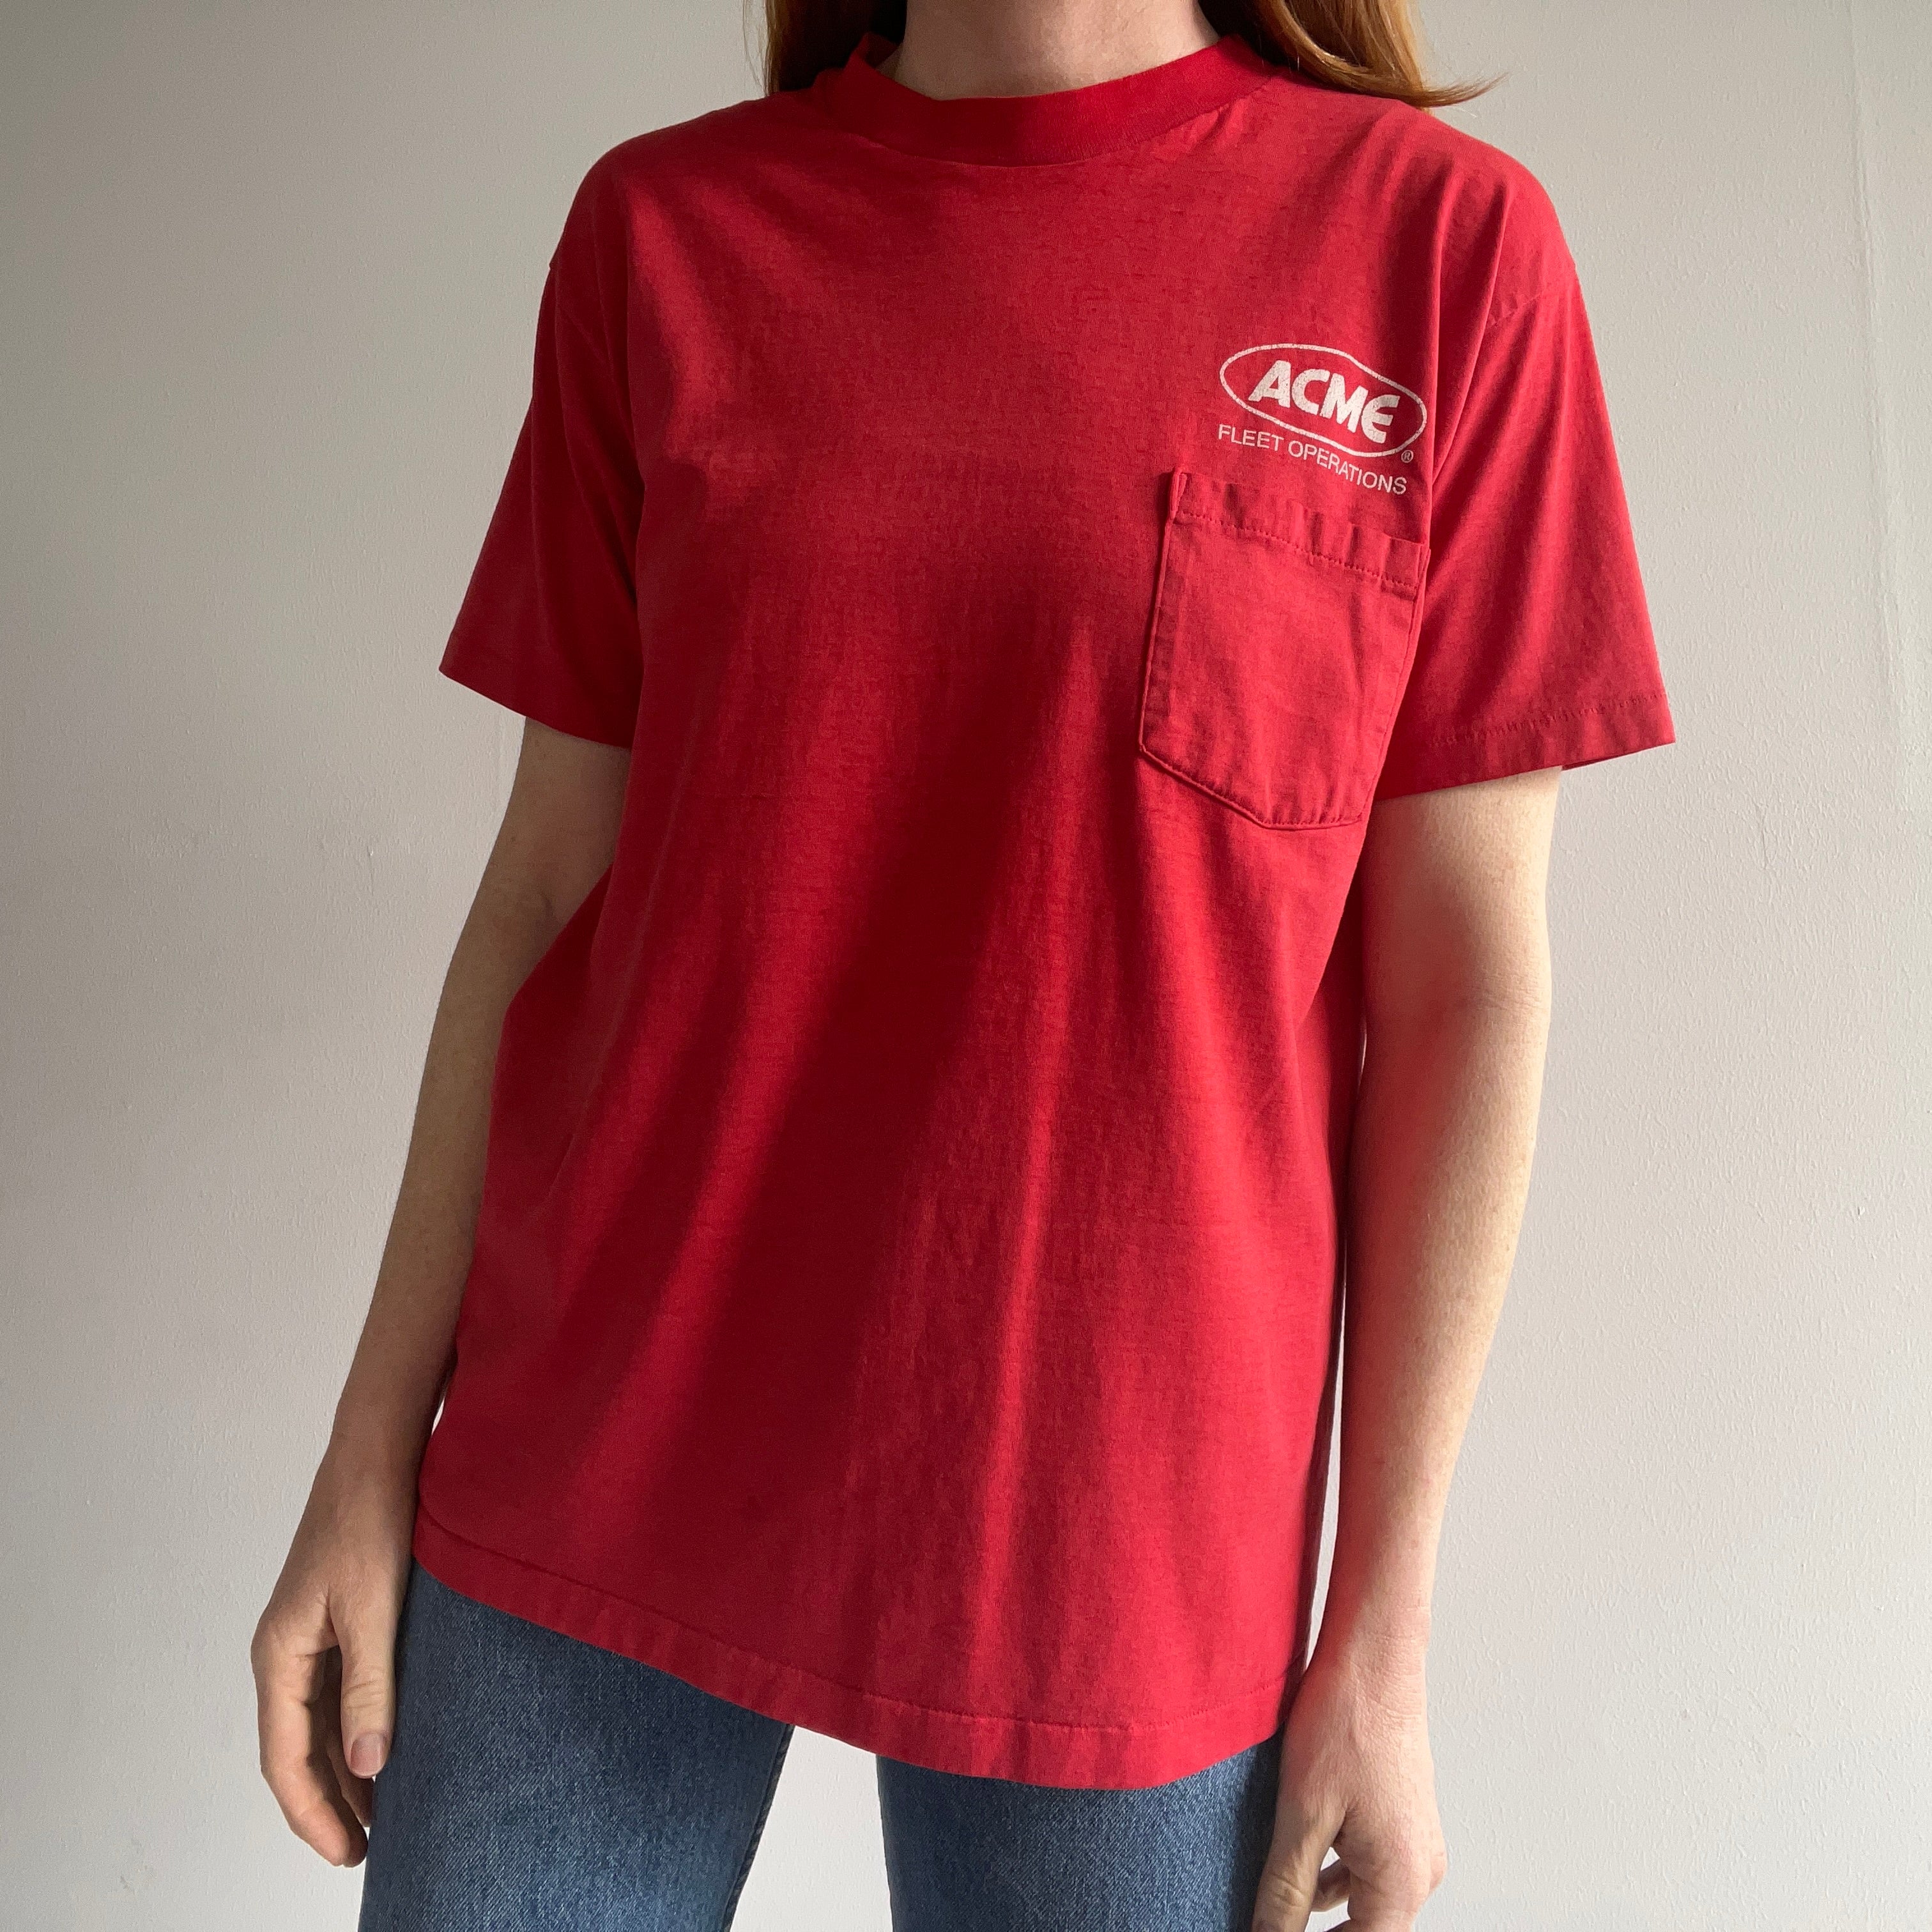 1980s Acme Fleet Operations Thinned Out Pocket T-Shirt